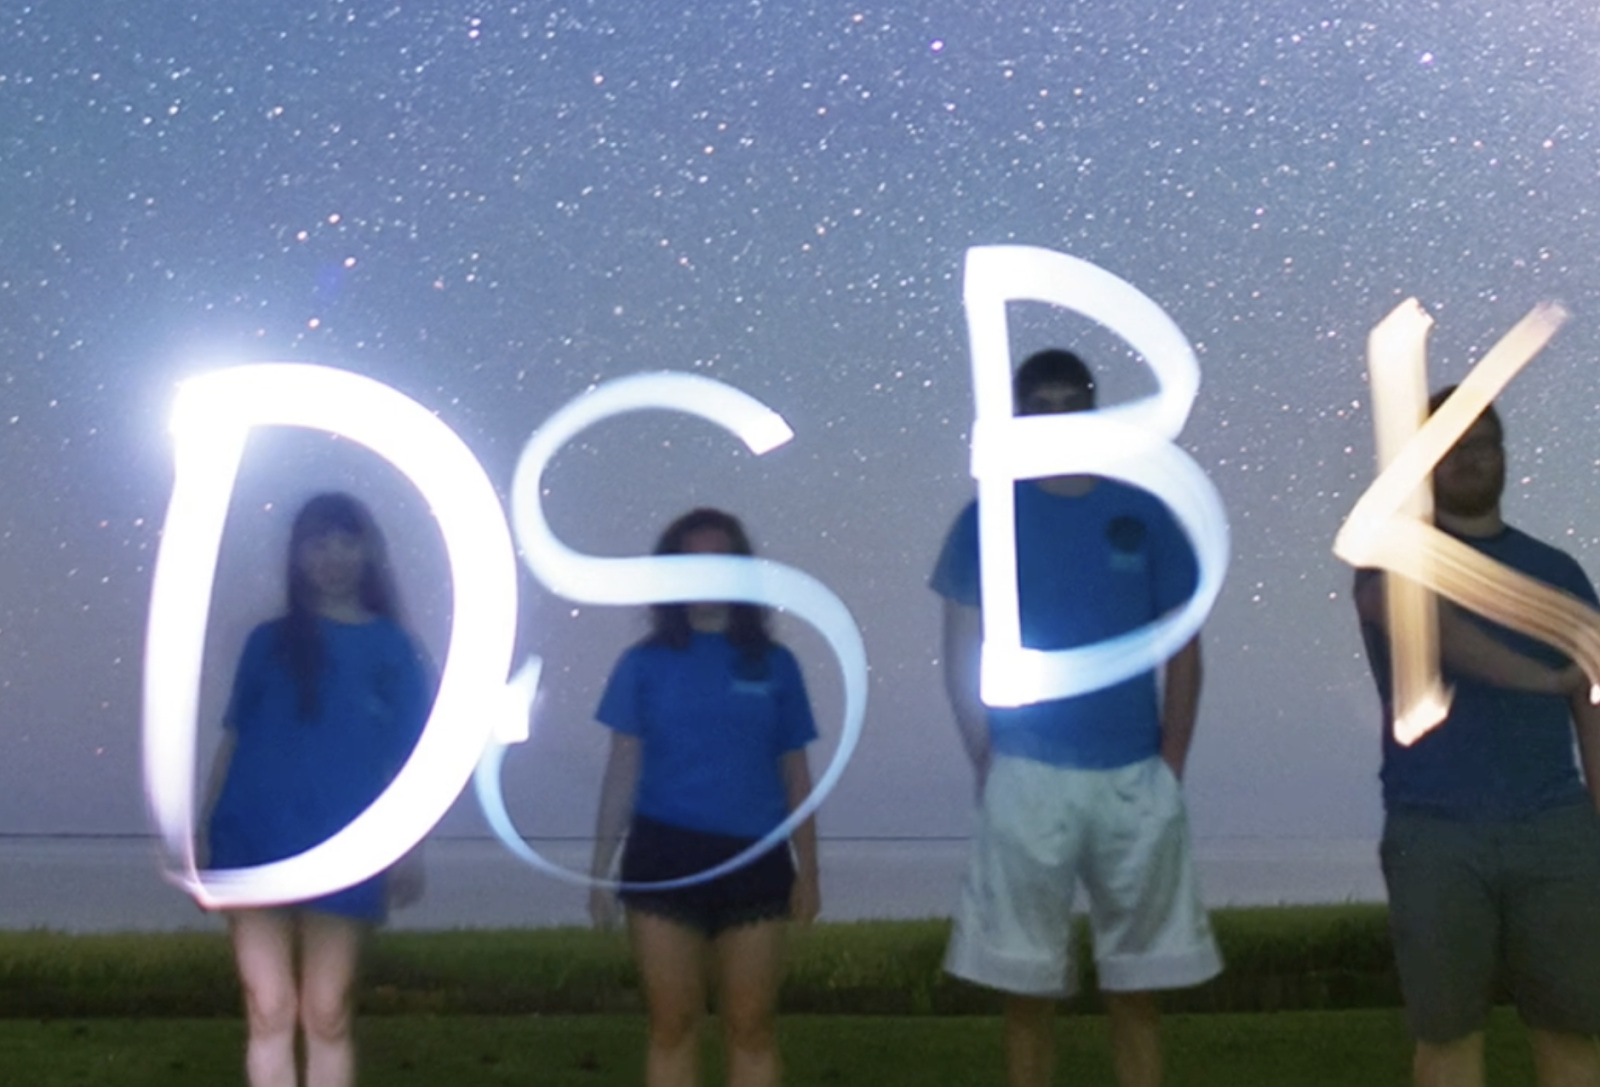 Four people standing outside at night with a starry sky and letters "DSBK" written in light in a long exposure image